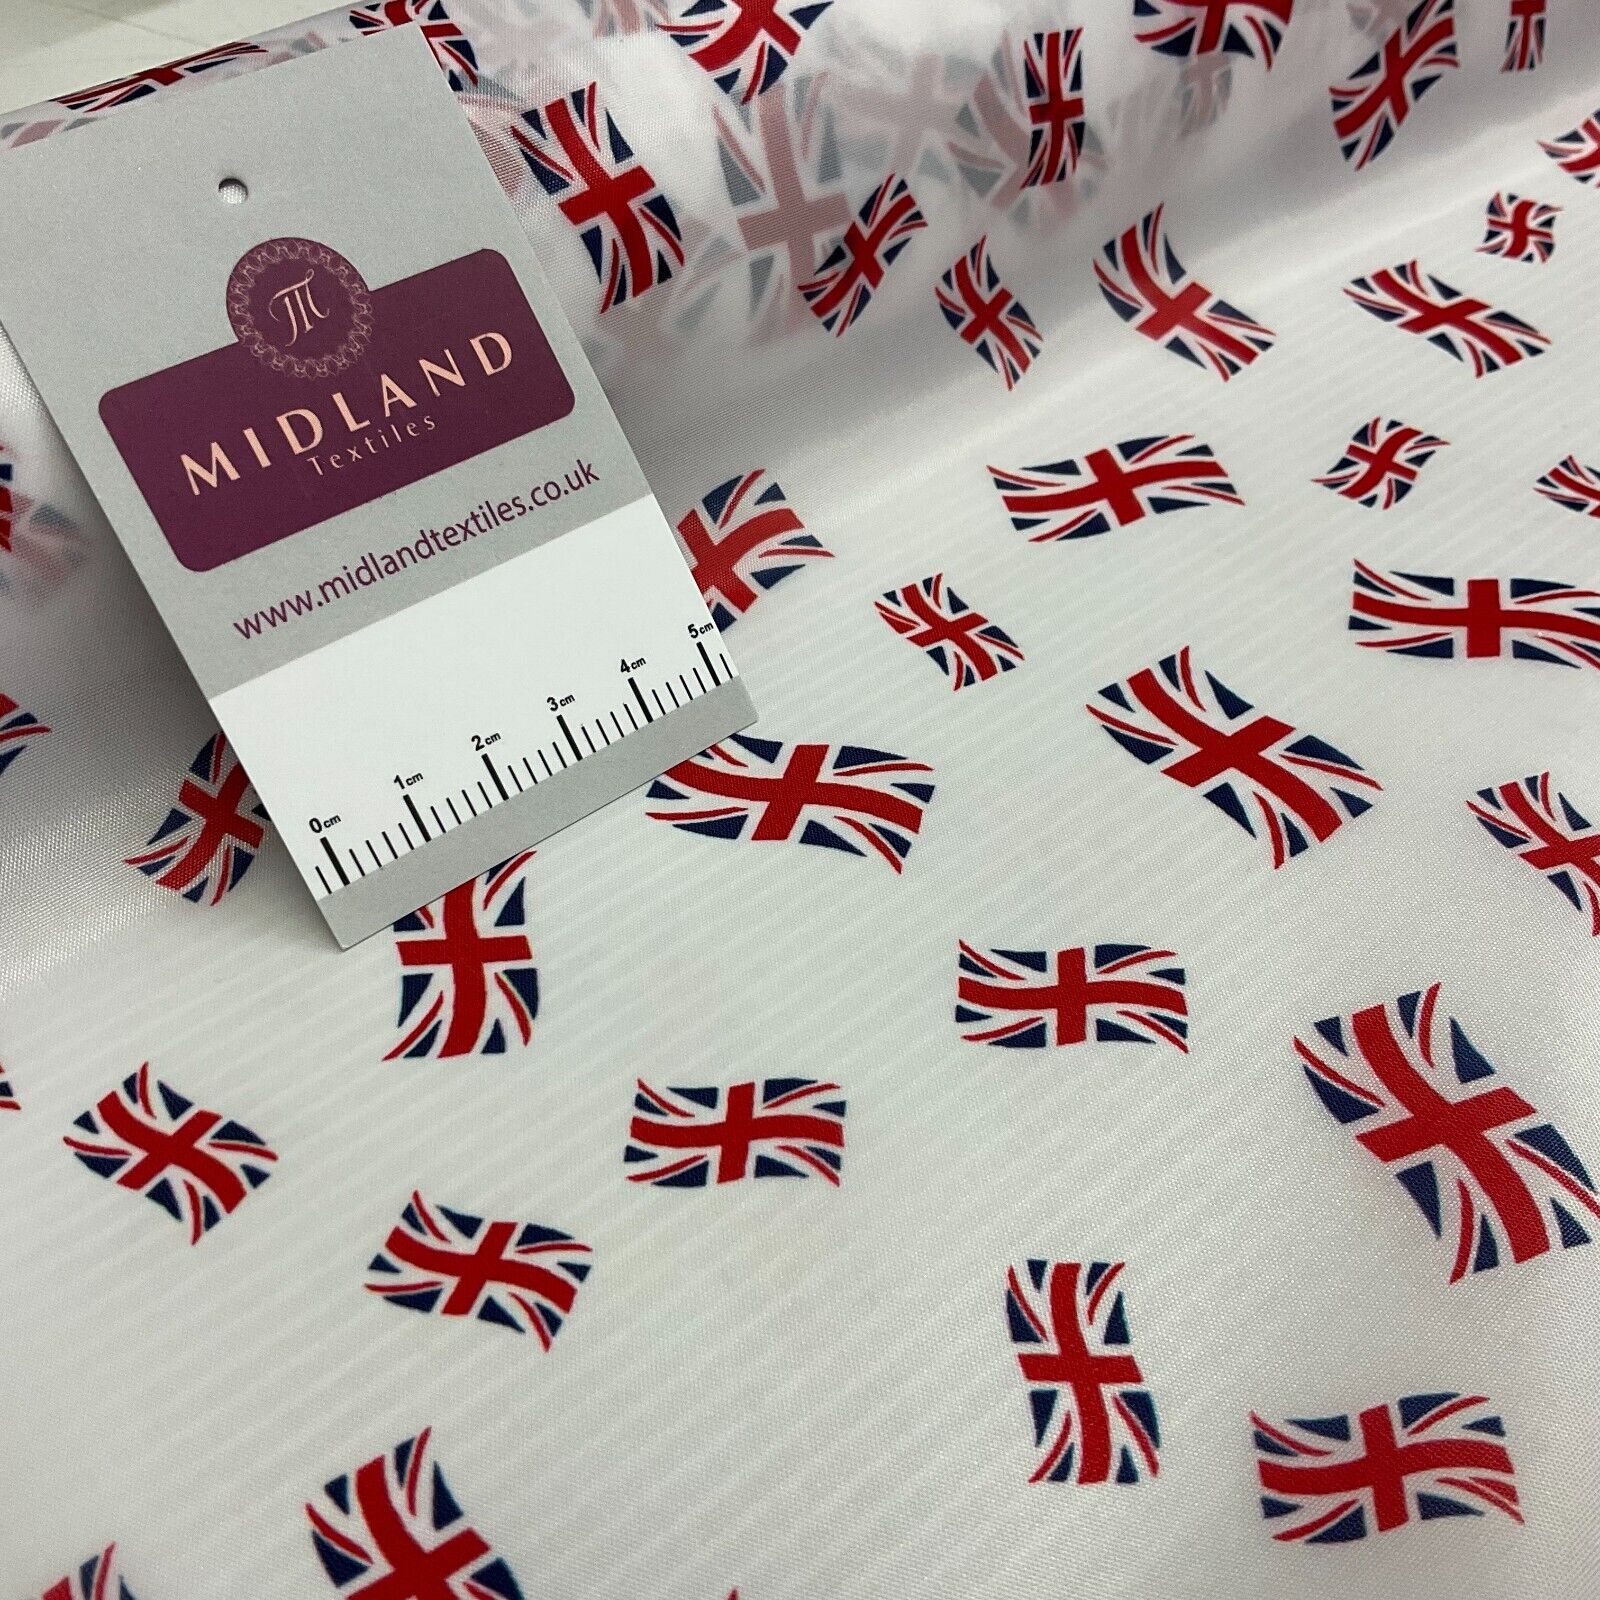 White Union Jack table runner Jubilee bunting coronation fabric 150cm wide M1683